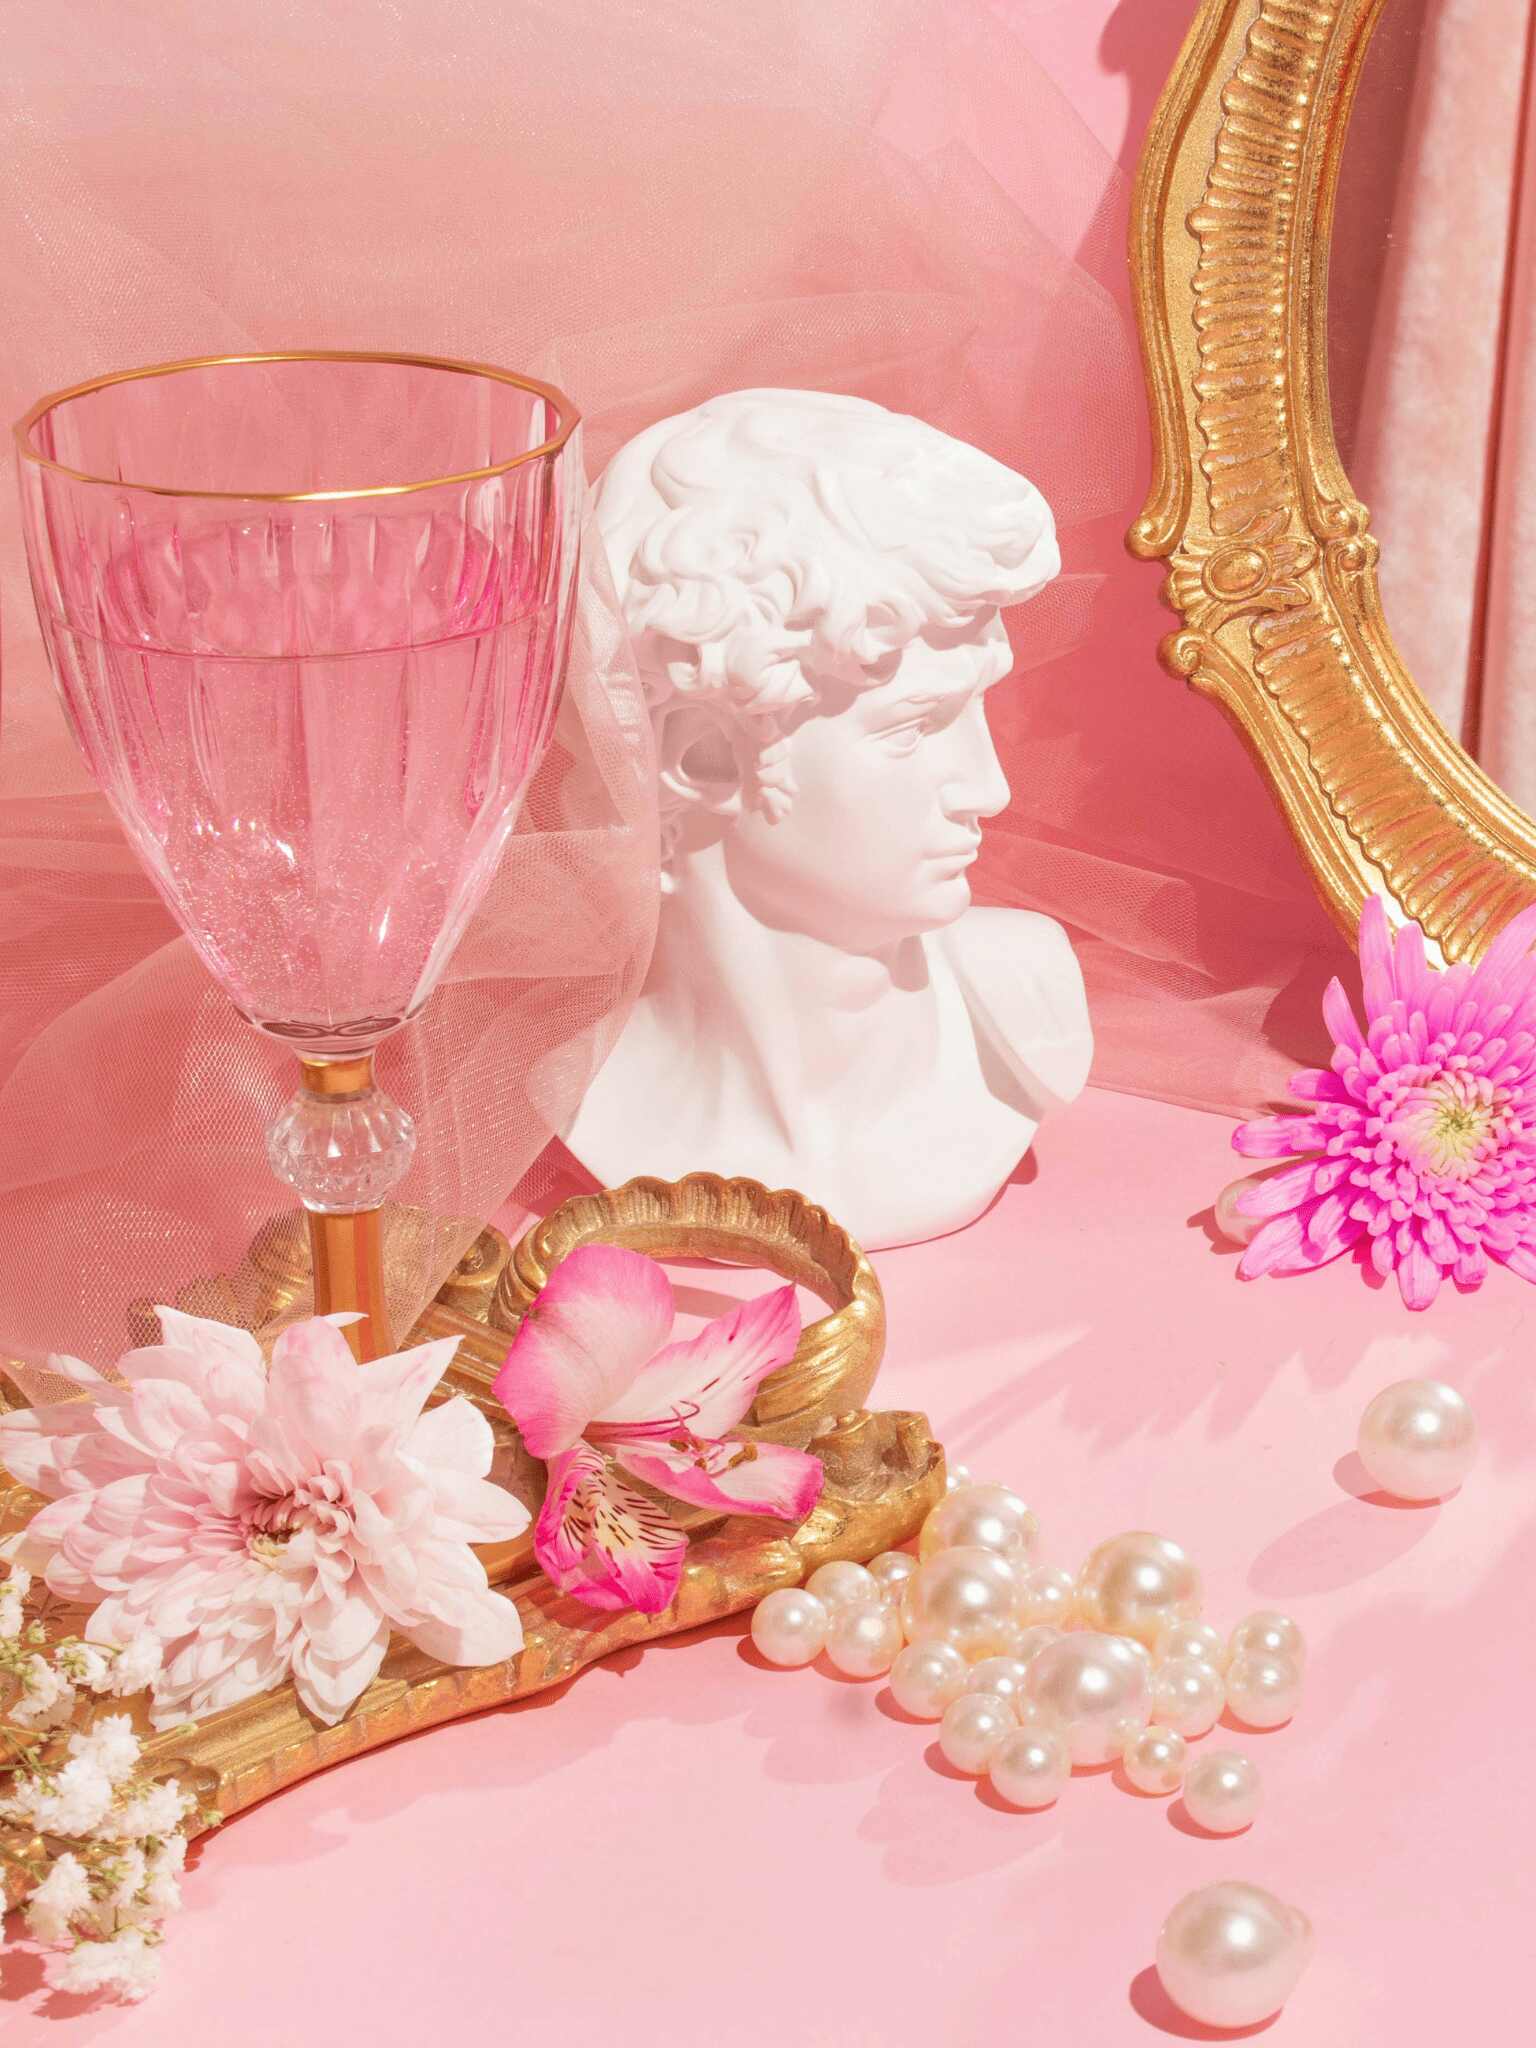 a white statue with flowers, pearls, a glass and a mirror on pink fabric